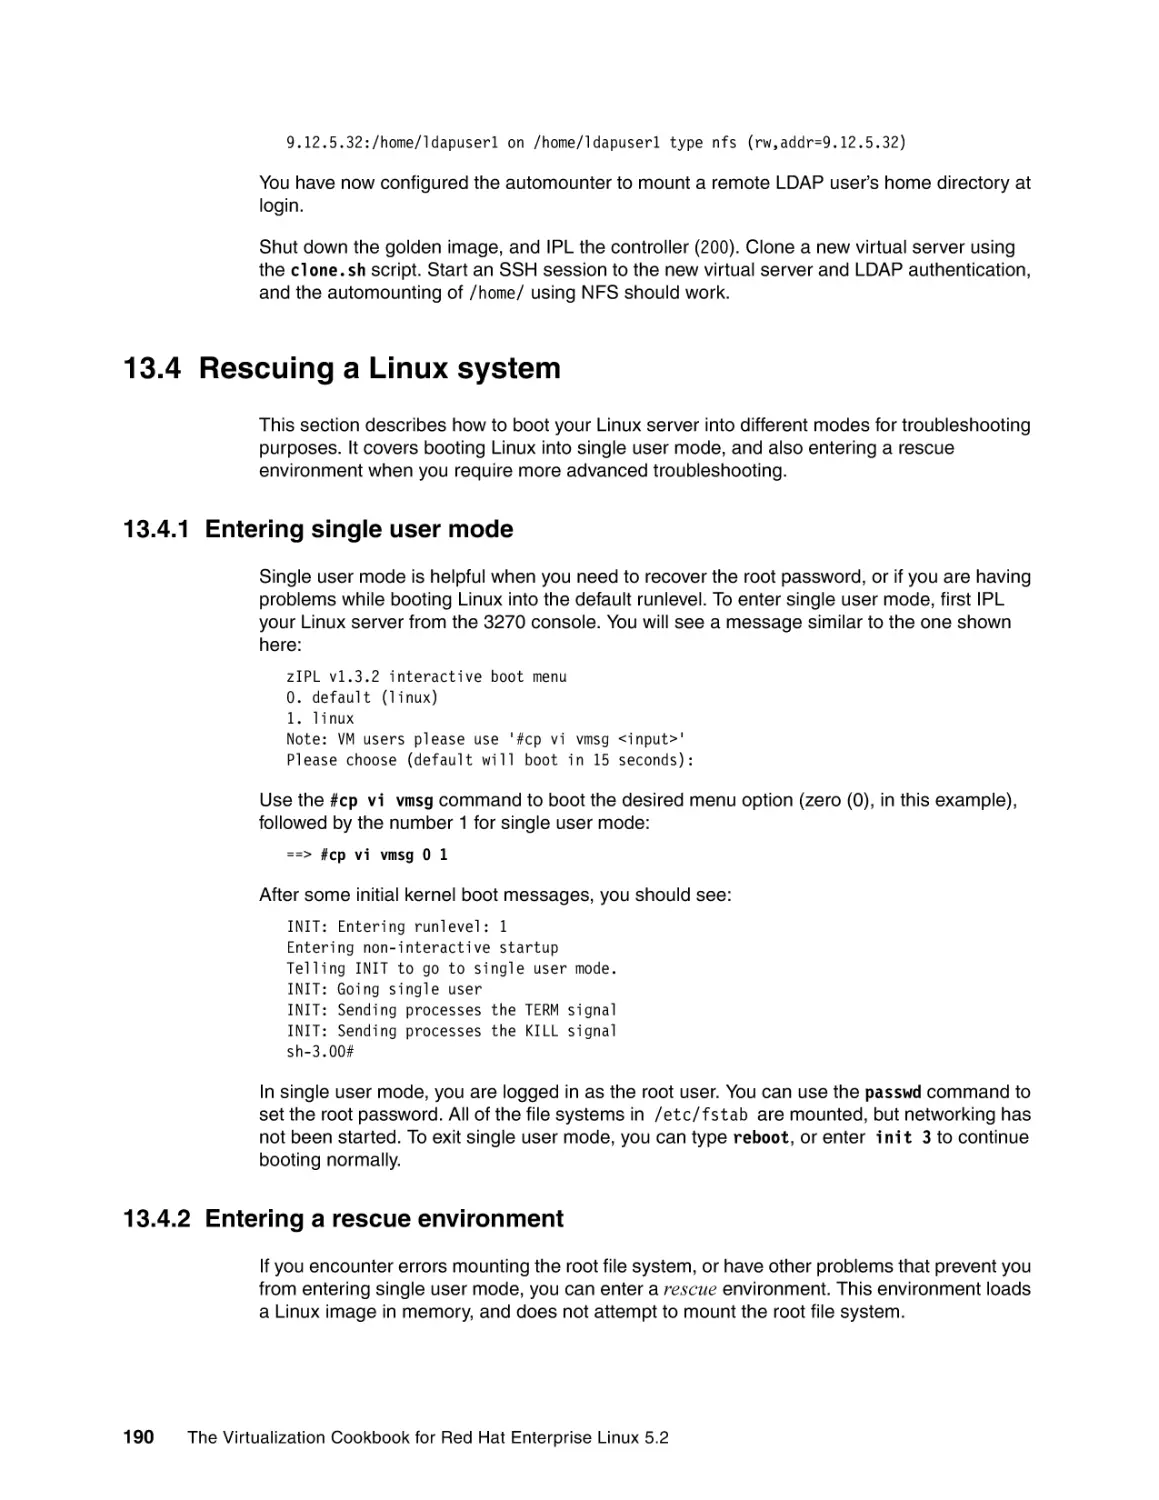 13.4 Rescuing a Linux system
13.4.1 Entering single user mode
13.4.2 Entering a rescue environment